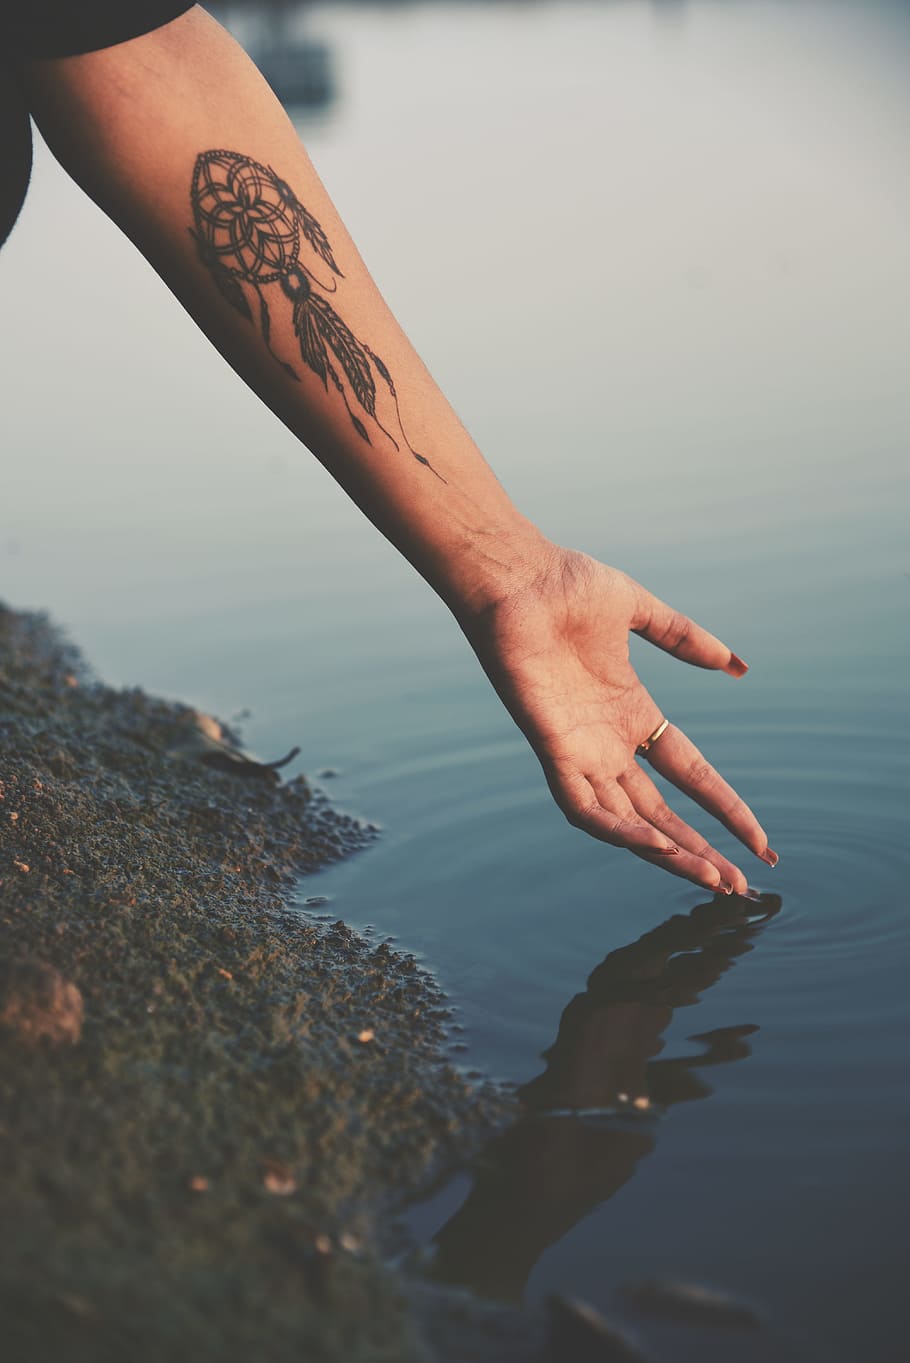 person hand reaching calm water with dreamcatcher tattoo, woman with dream catcher arm tattoo, HD wallpaper